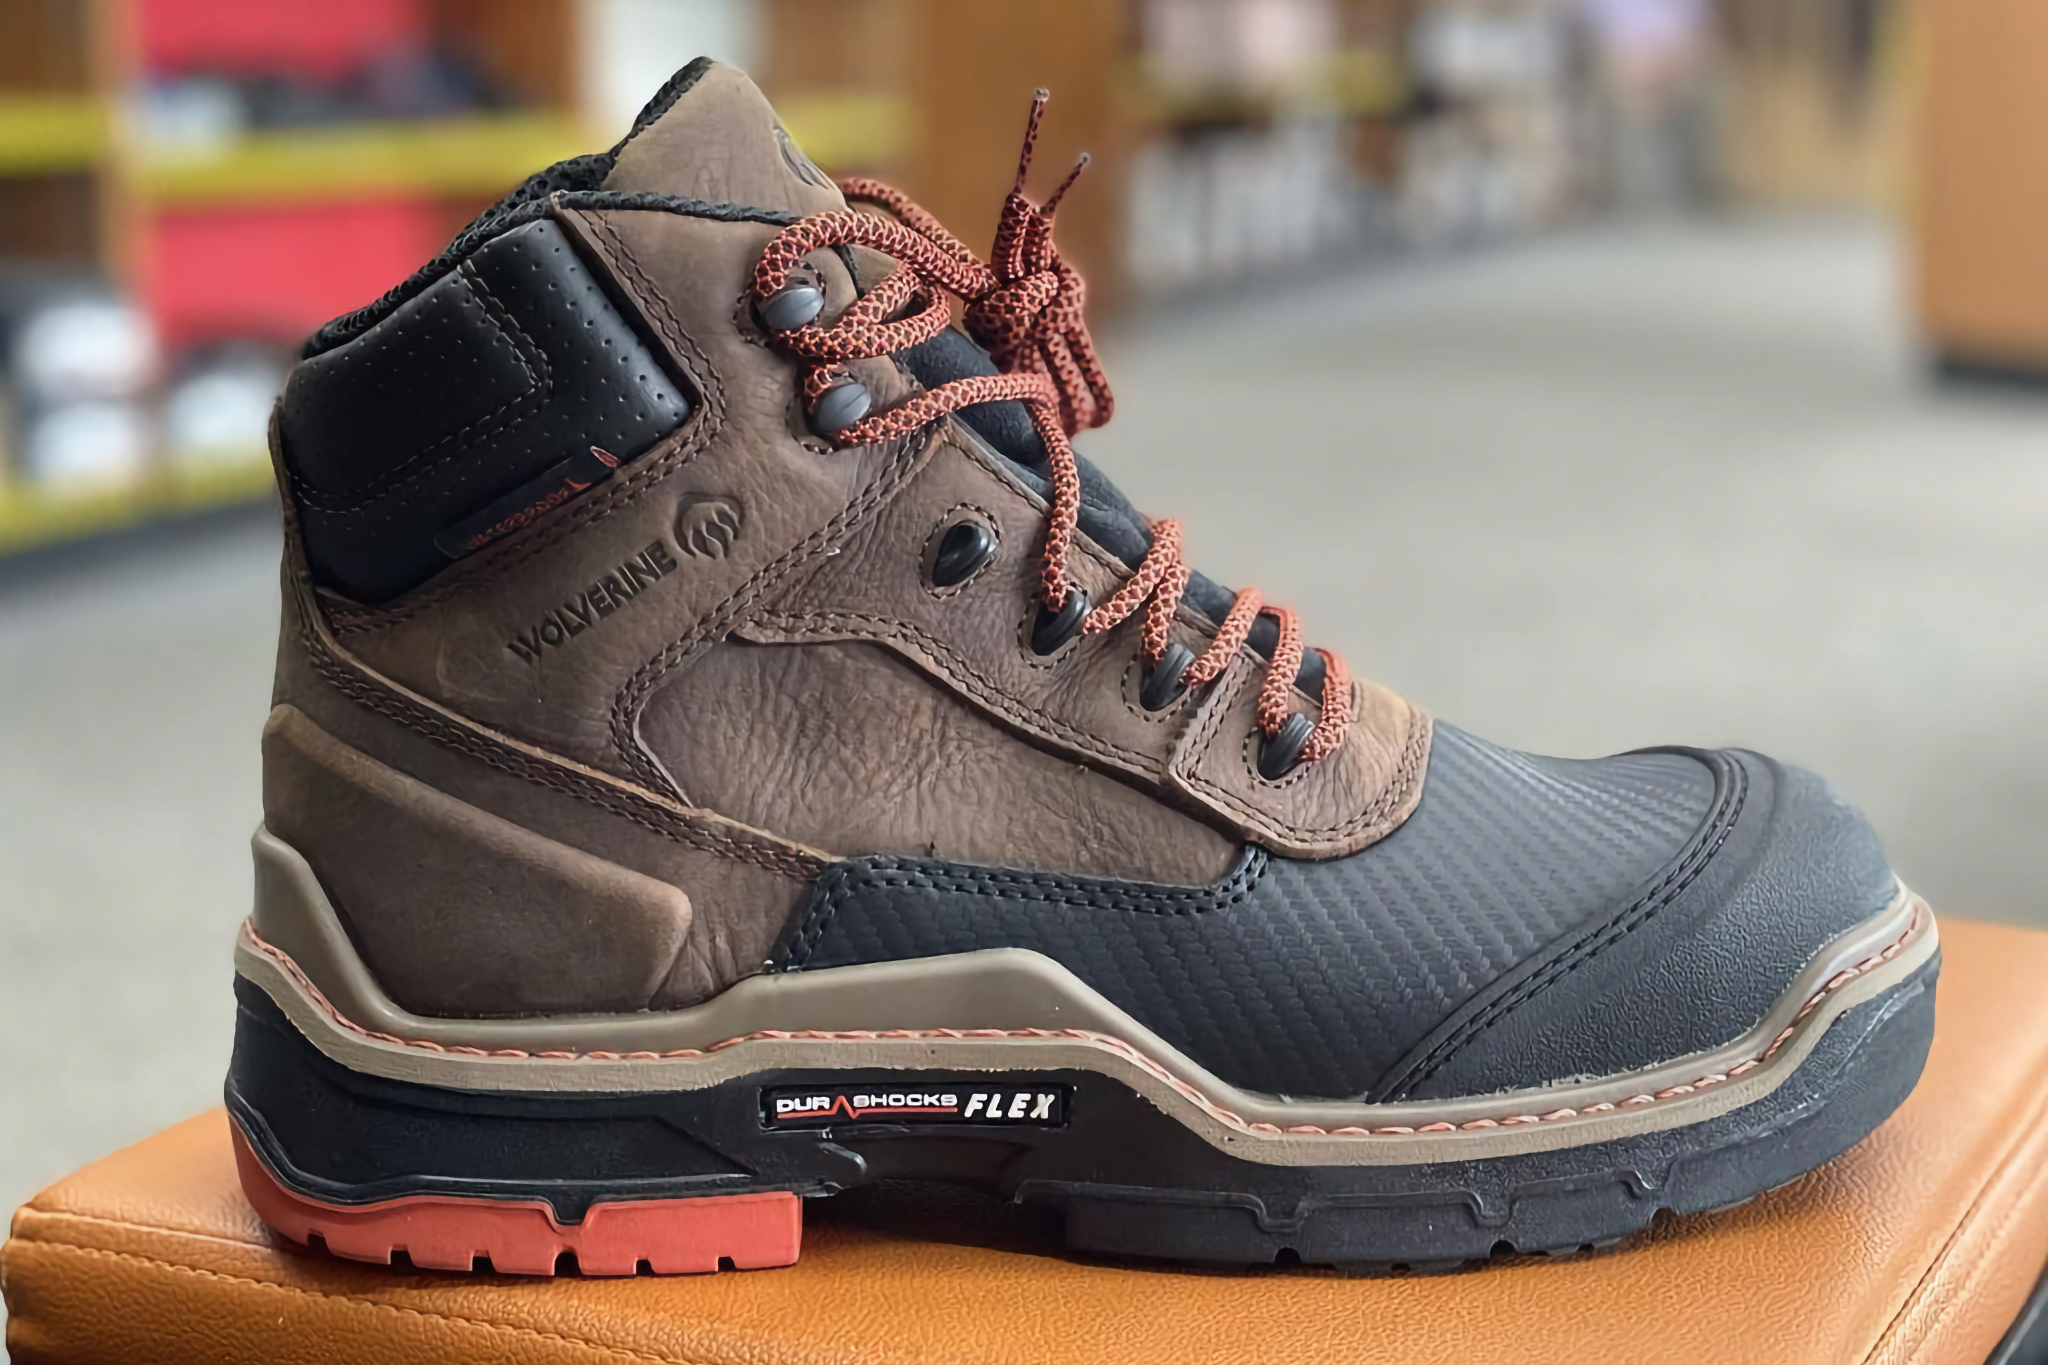 Welcome to Safeguard Safety Shoes - your trusted source for work boots and safety shoes in Upstate, South Carolina for over 25 years!